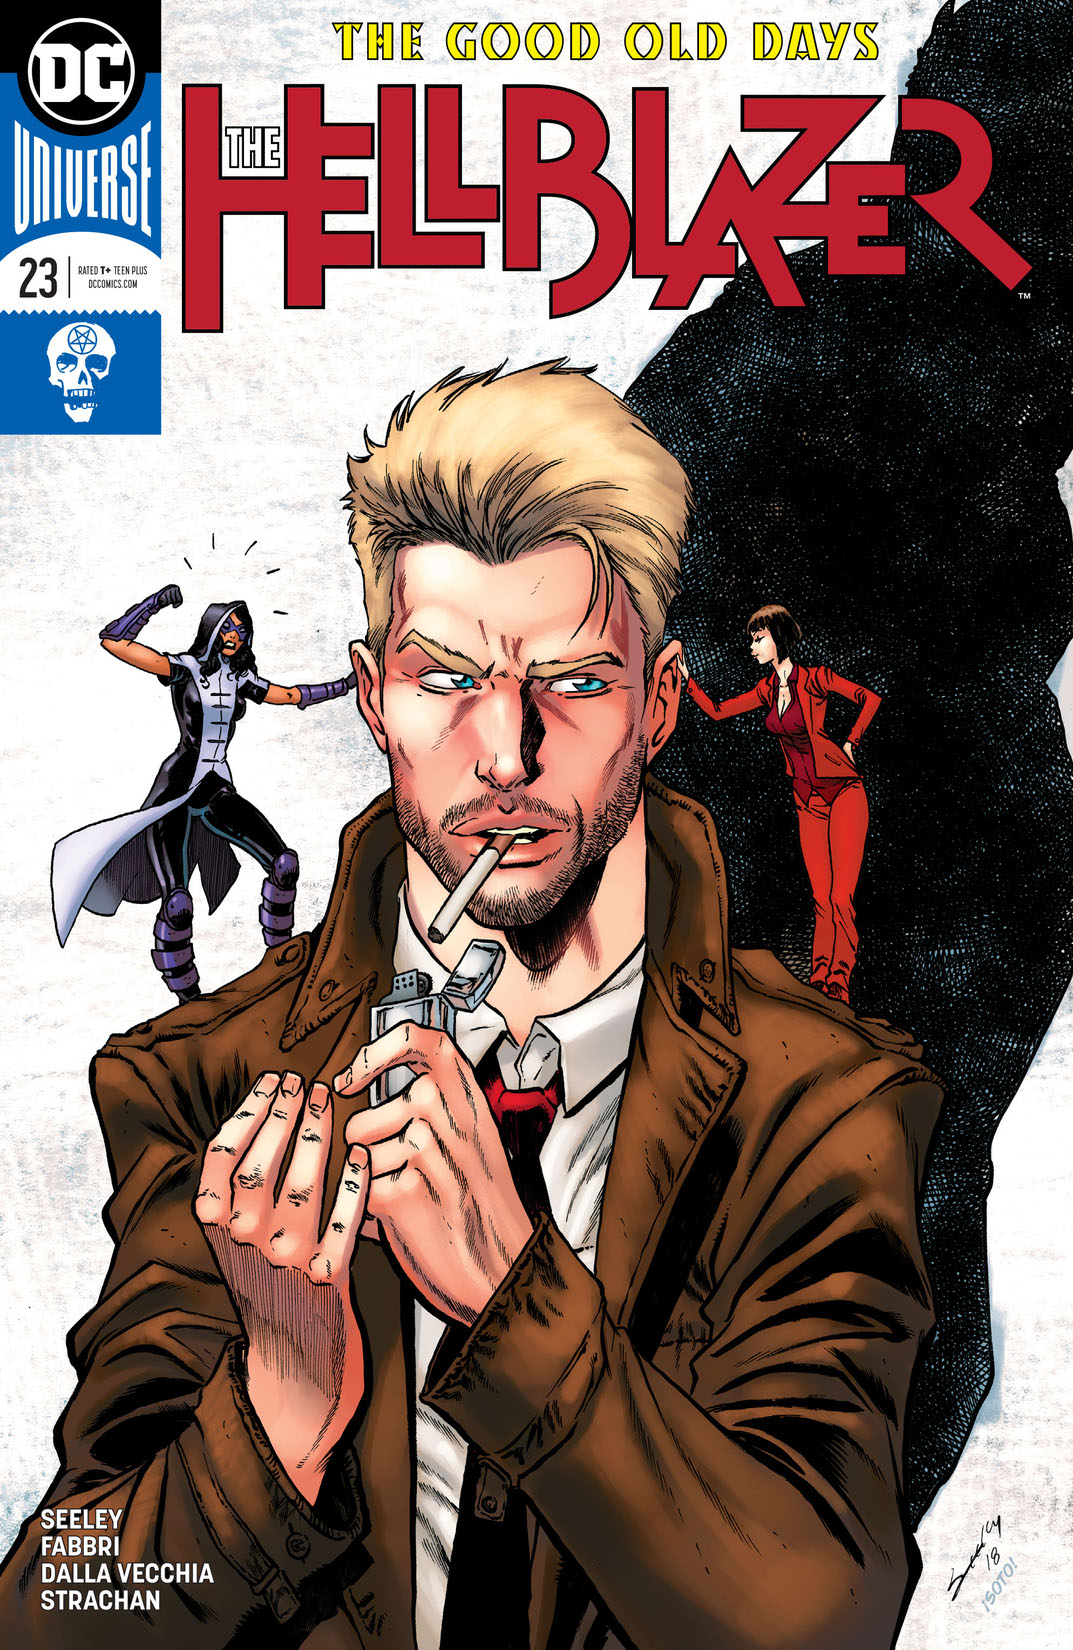 The Hellblazer #23 preview images